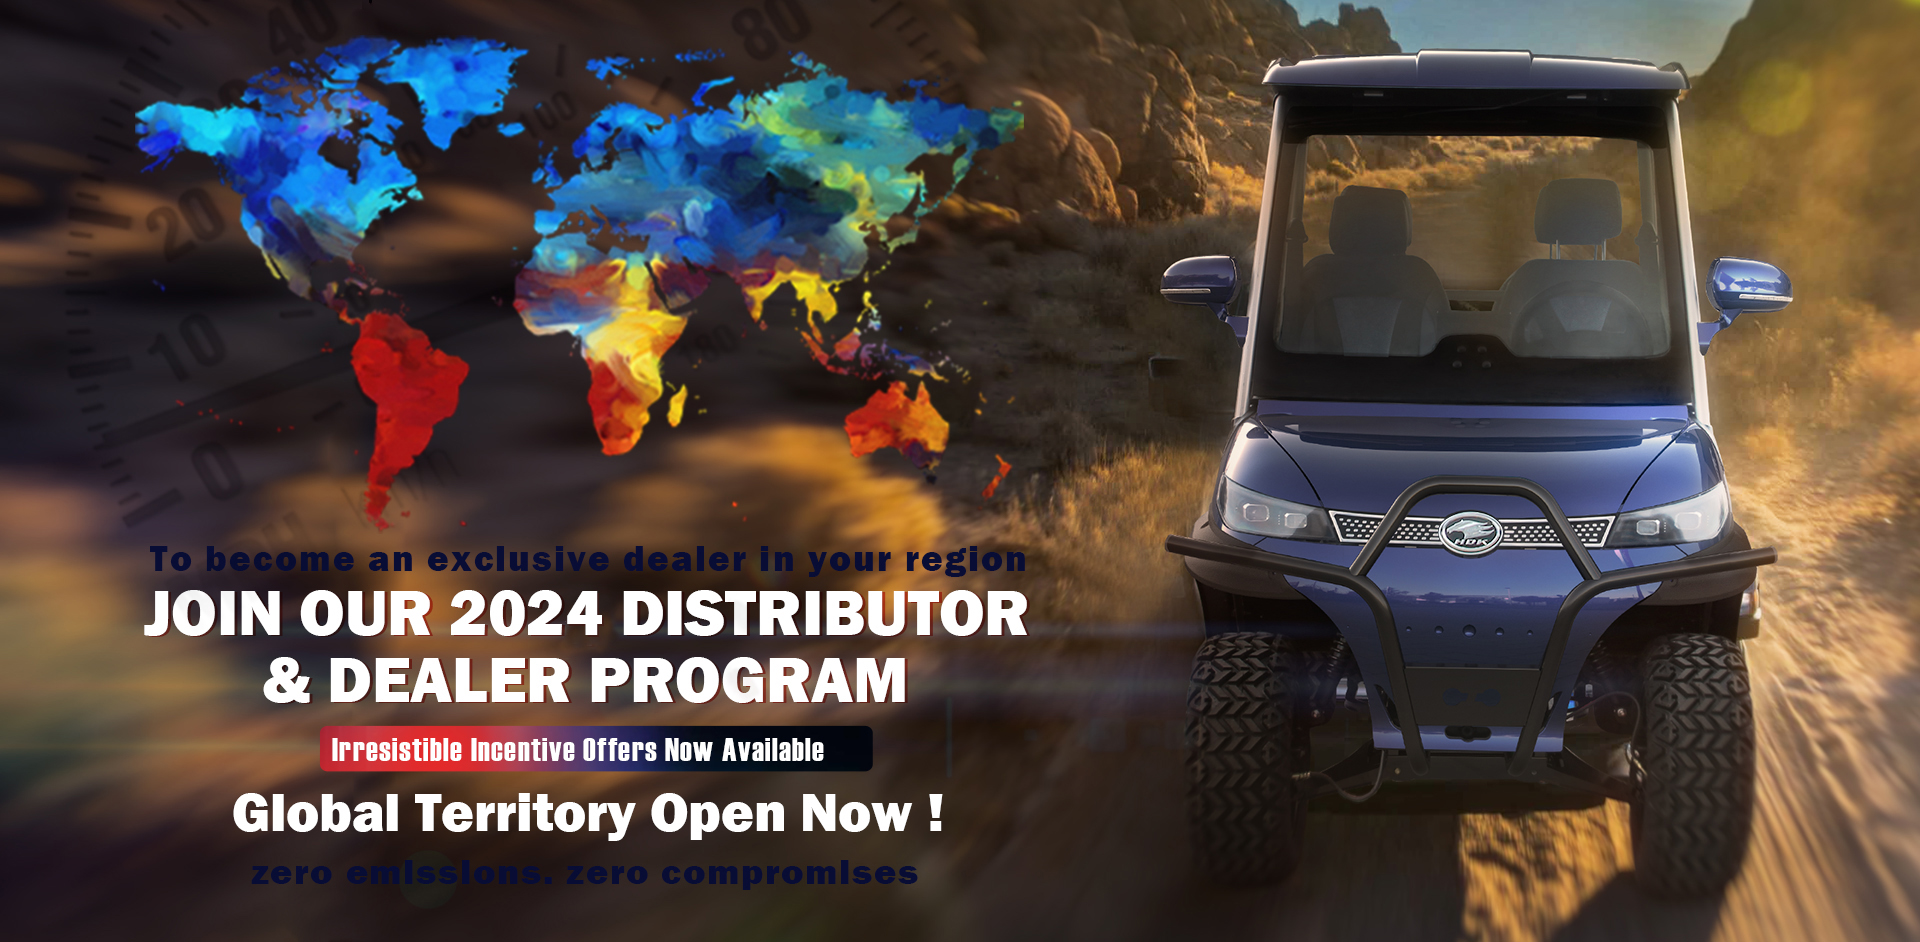 HDK-ELECTRIC-VEHICLE-2023-Dealer-Wantted-POSTER-2